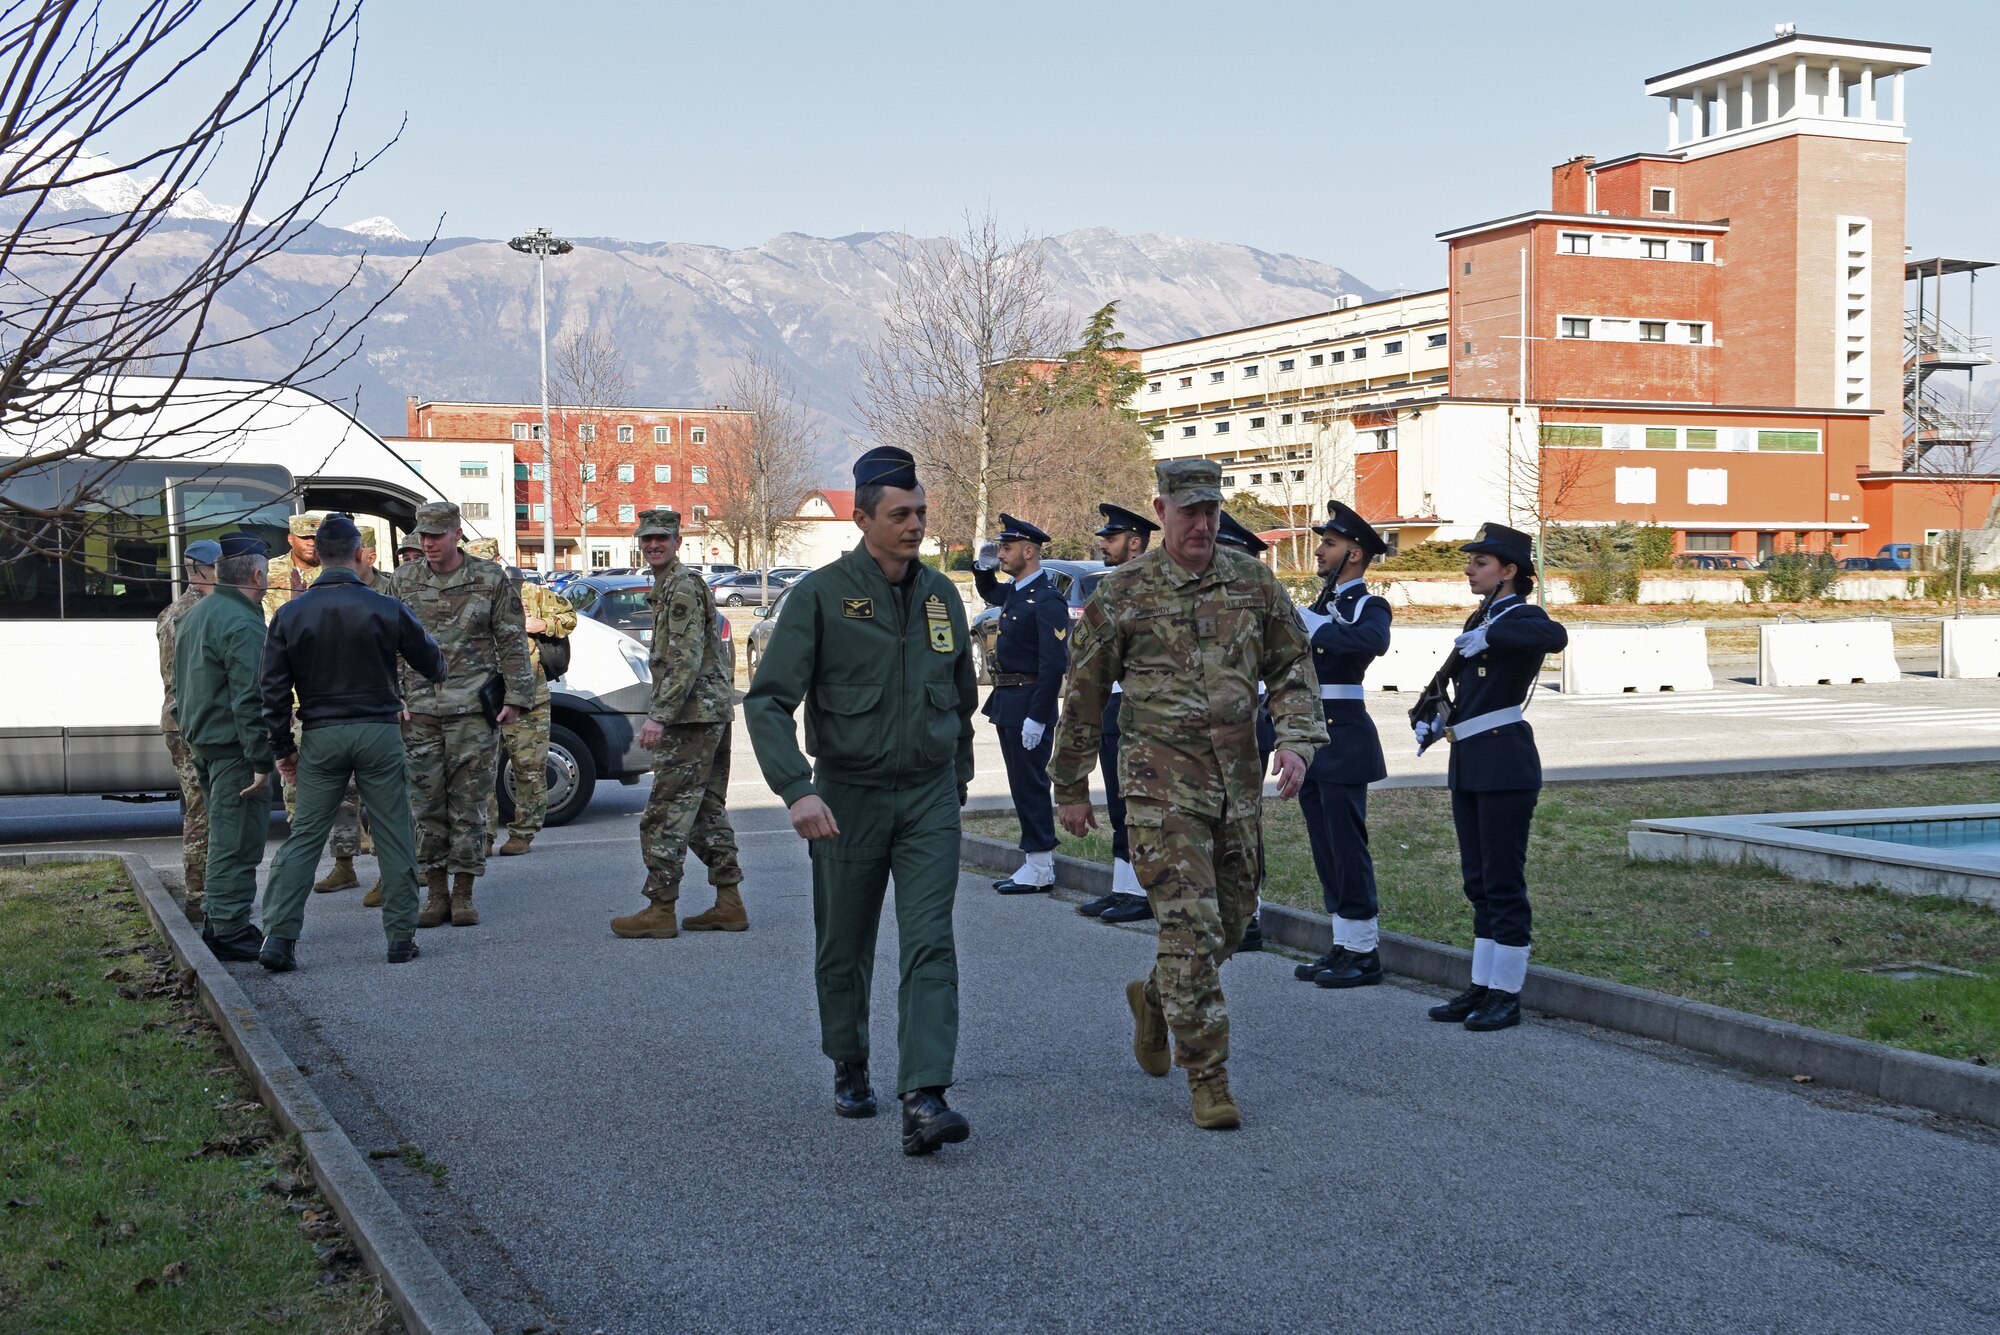 U.S. Air Force Maj. Gen. John Gordy, U.S. Air Force Expeditionary Center commander, right, meets with Italian air force Col. Luca Crovatti, Aviano Air Base commander, left, during a site visit of the 724th Air Mobility Squadron at Aviano Air Base, Italy, Jan. 24, 2020. The USAF Expeditionary Center provides direct oversight for the Global Air Mobility Support System and installation support, contingency response and building partnership capacity mission sets within the global mobility enterprise.